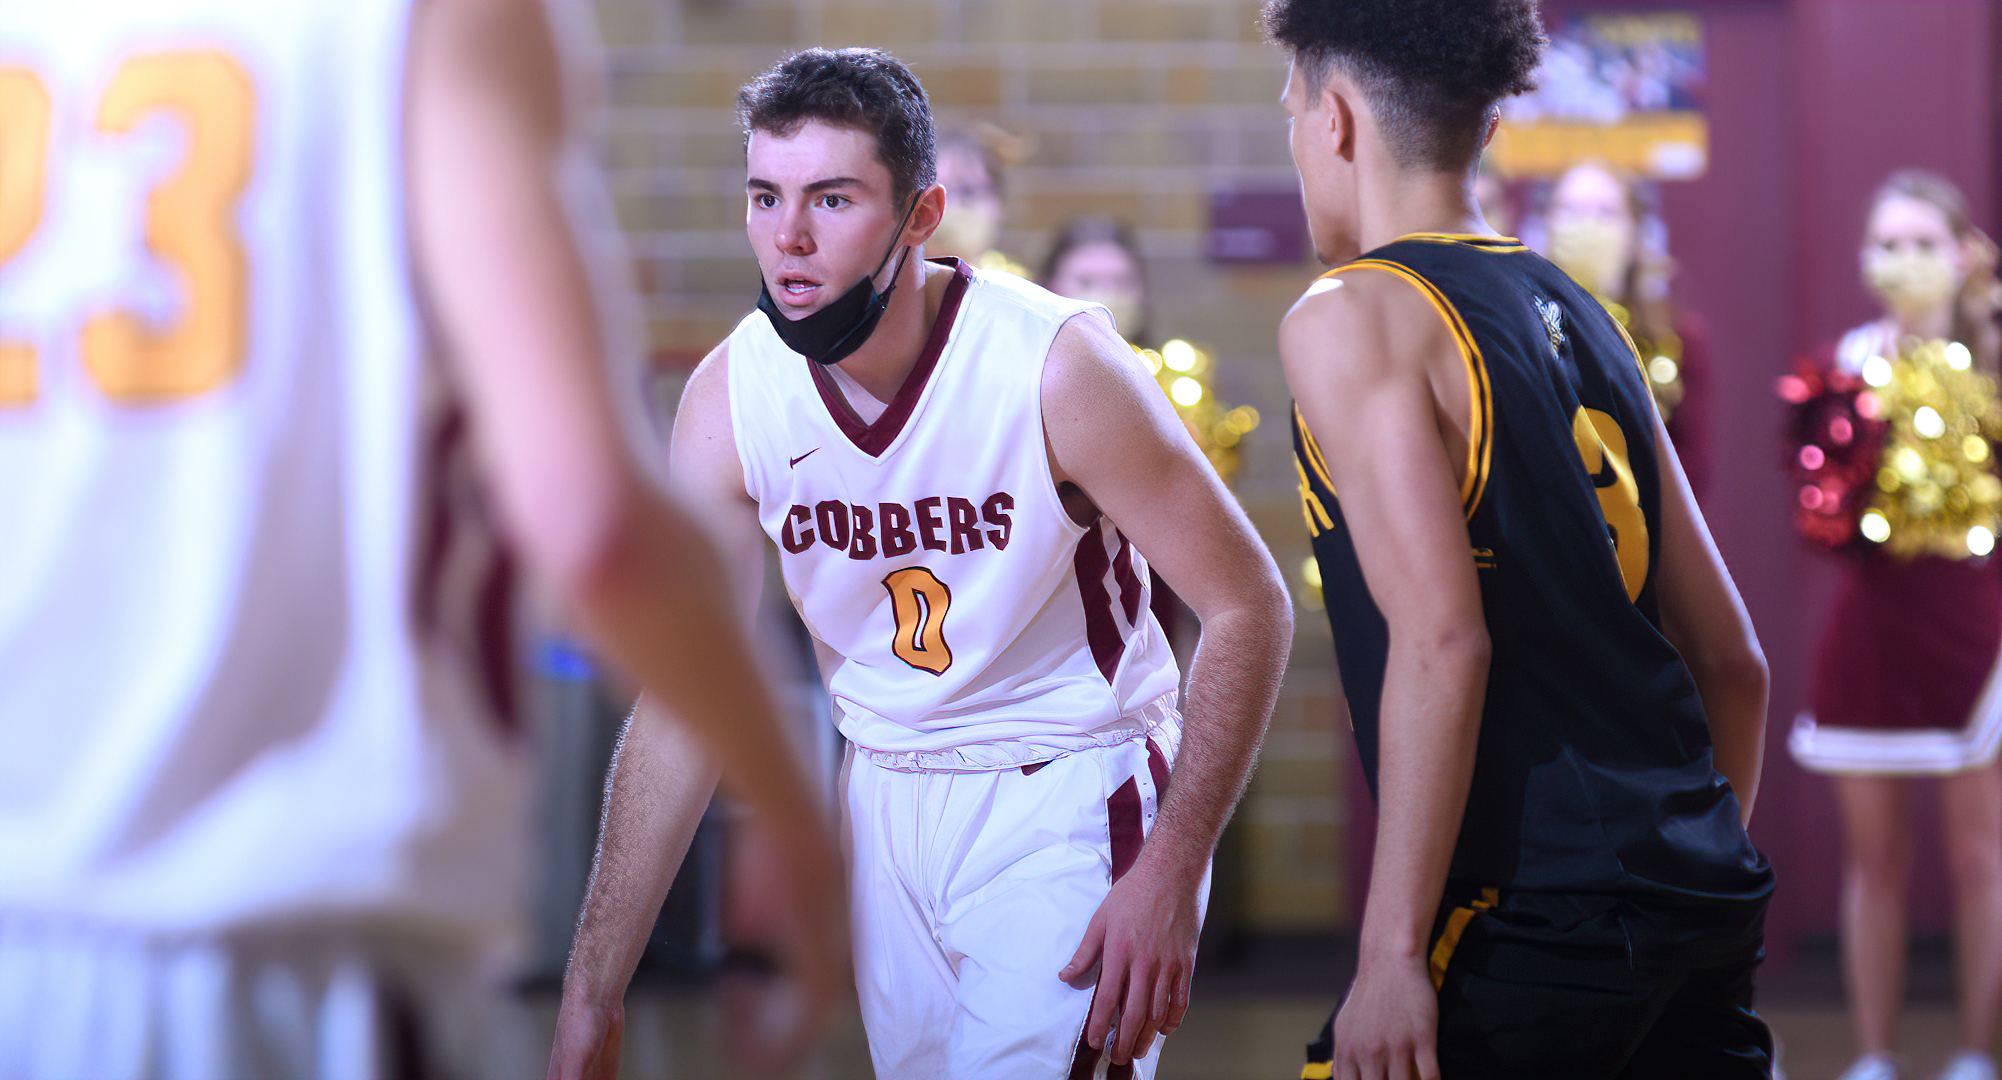 Charlie Rasmussen brings the ball up the court in the Cobbers' game with Wis.-Superior. He finished with 10 points and a team-high six rebounds.